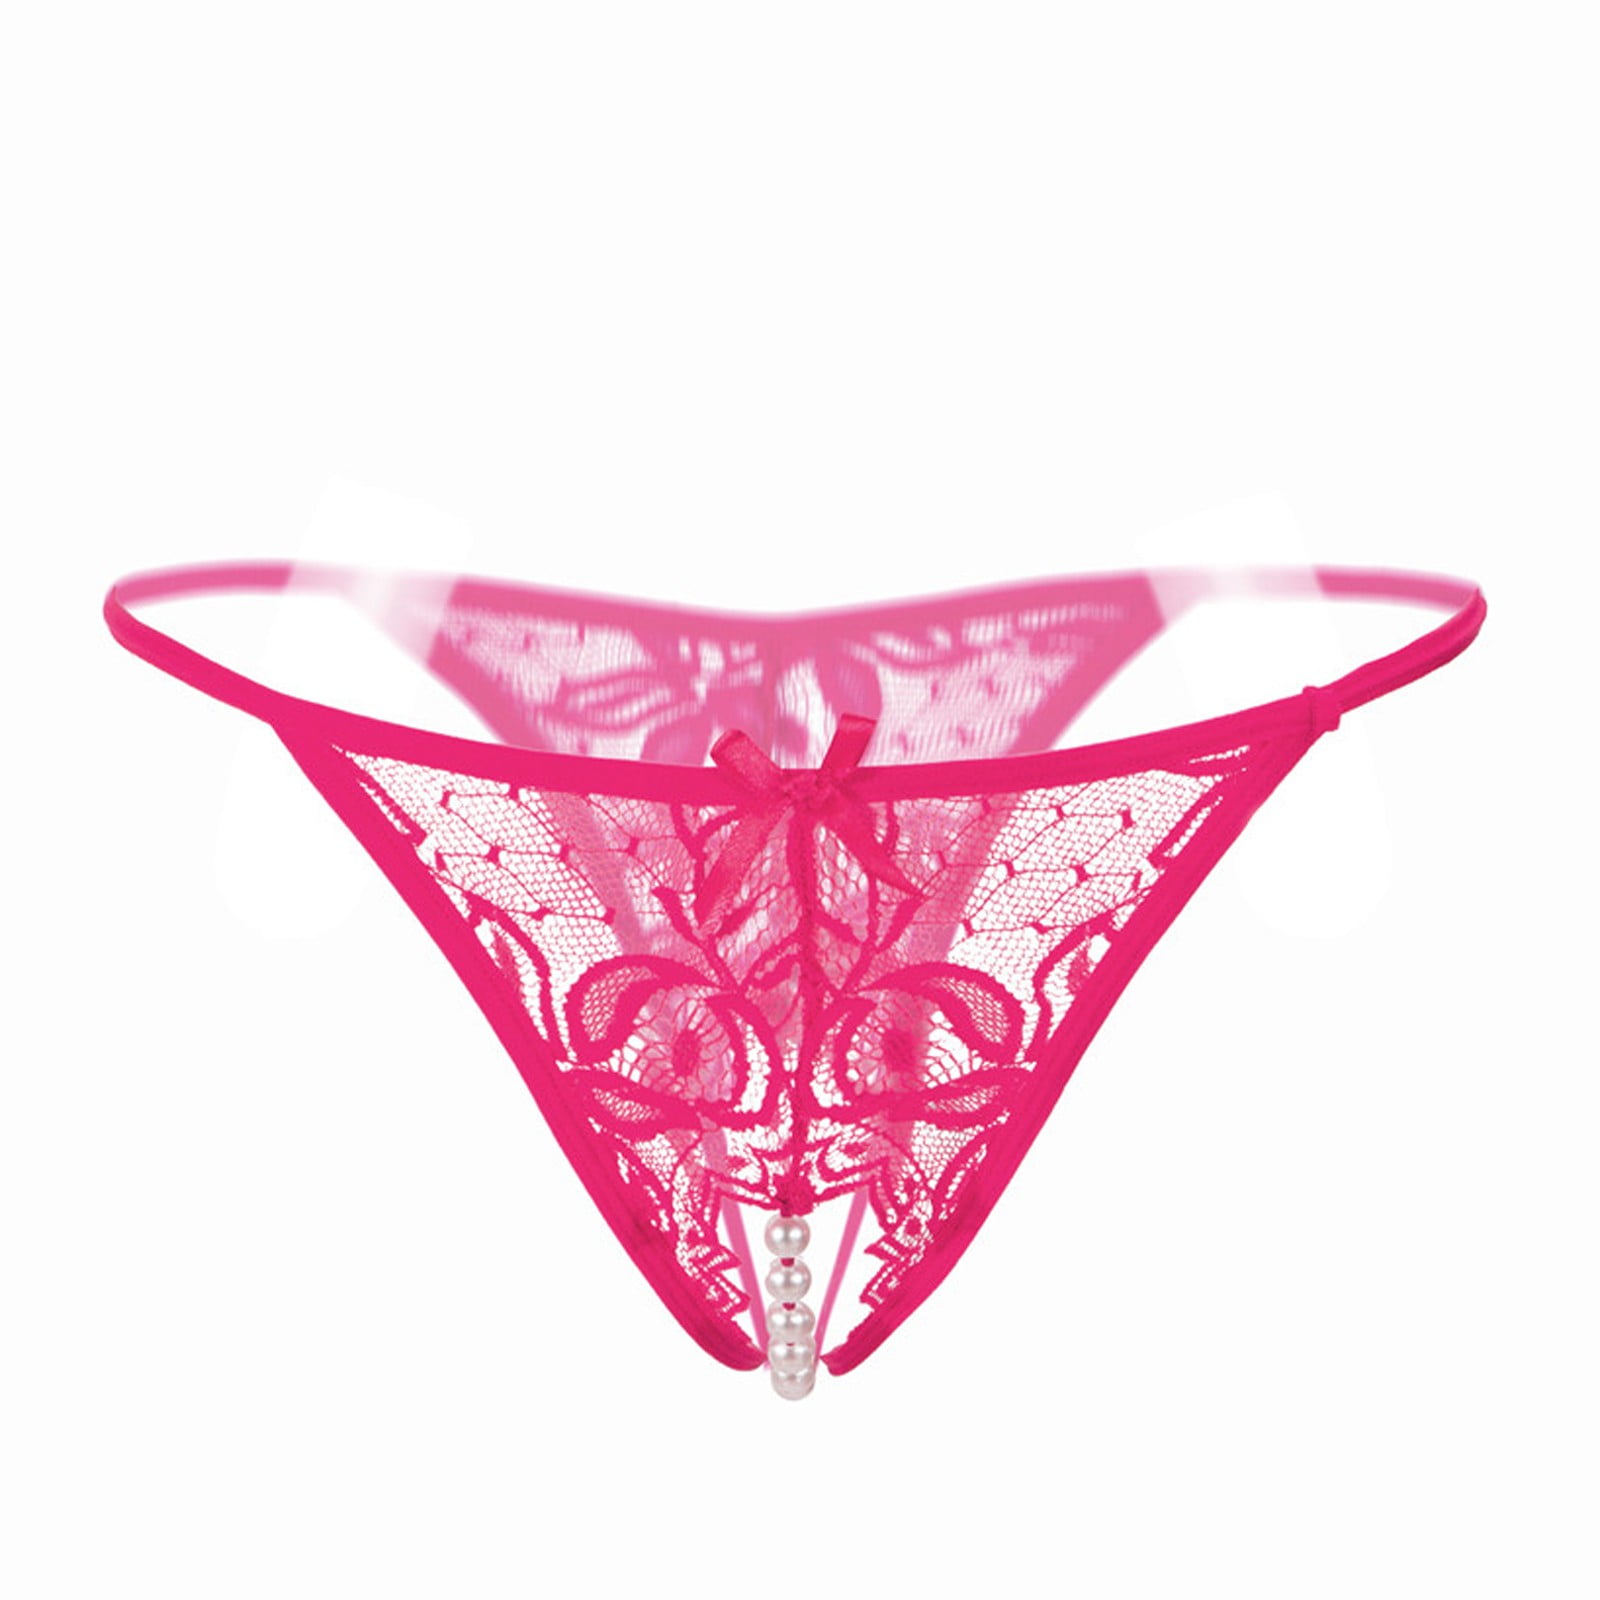 Thong Panties in Tickle Me Pink Stretch Lace, Also Available Crotchless